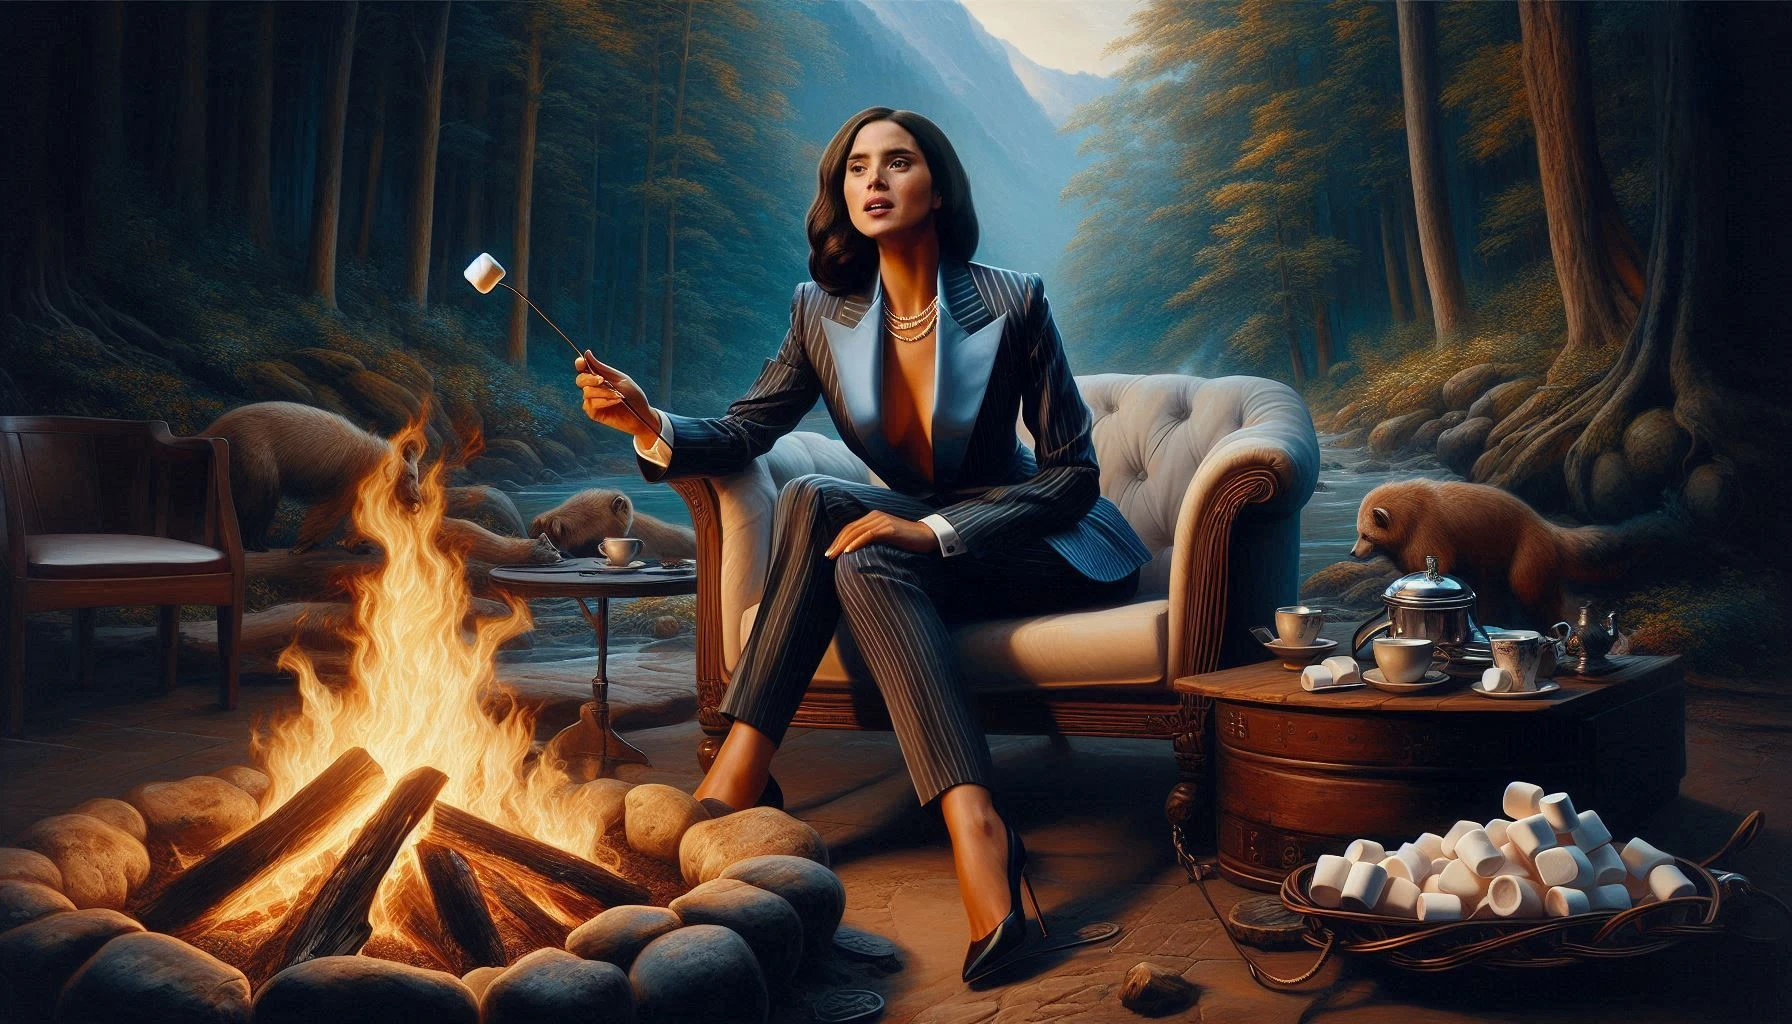 Woman in suit sit around a campfire in a wilderness setting